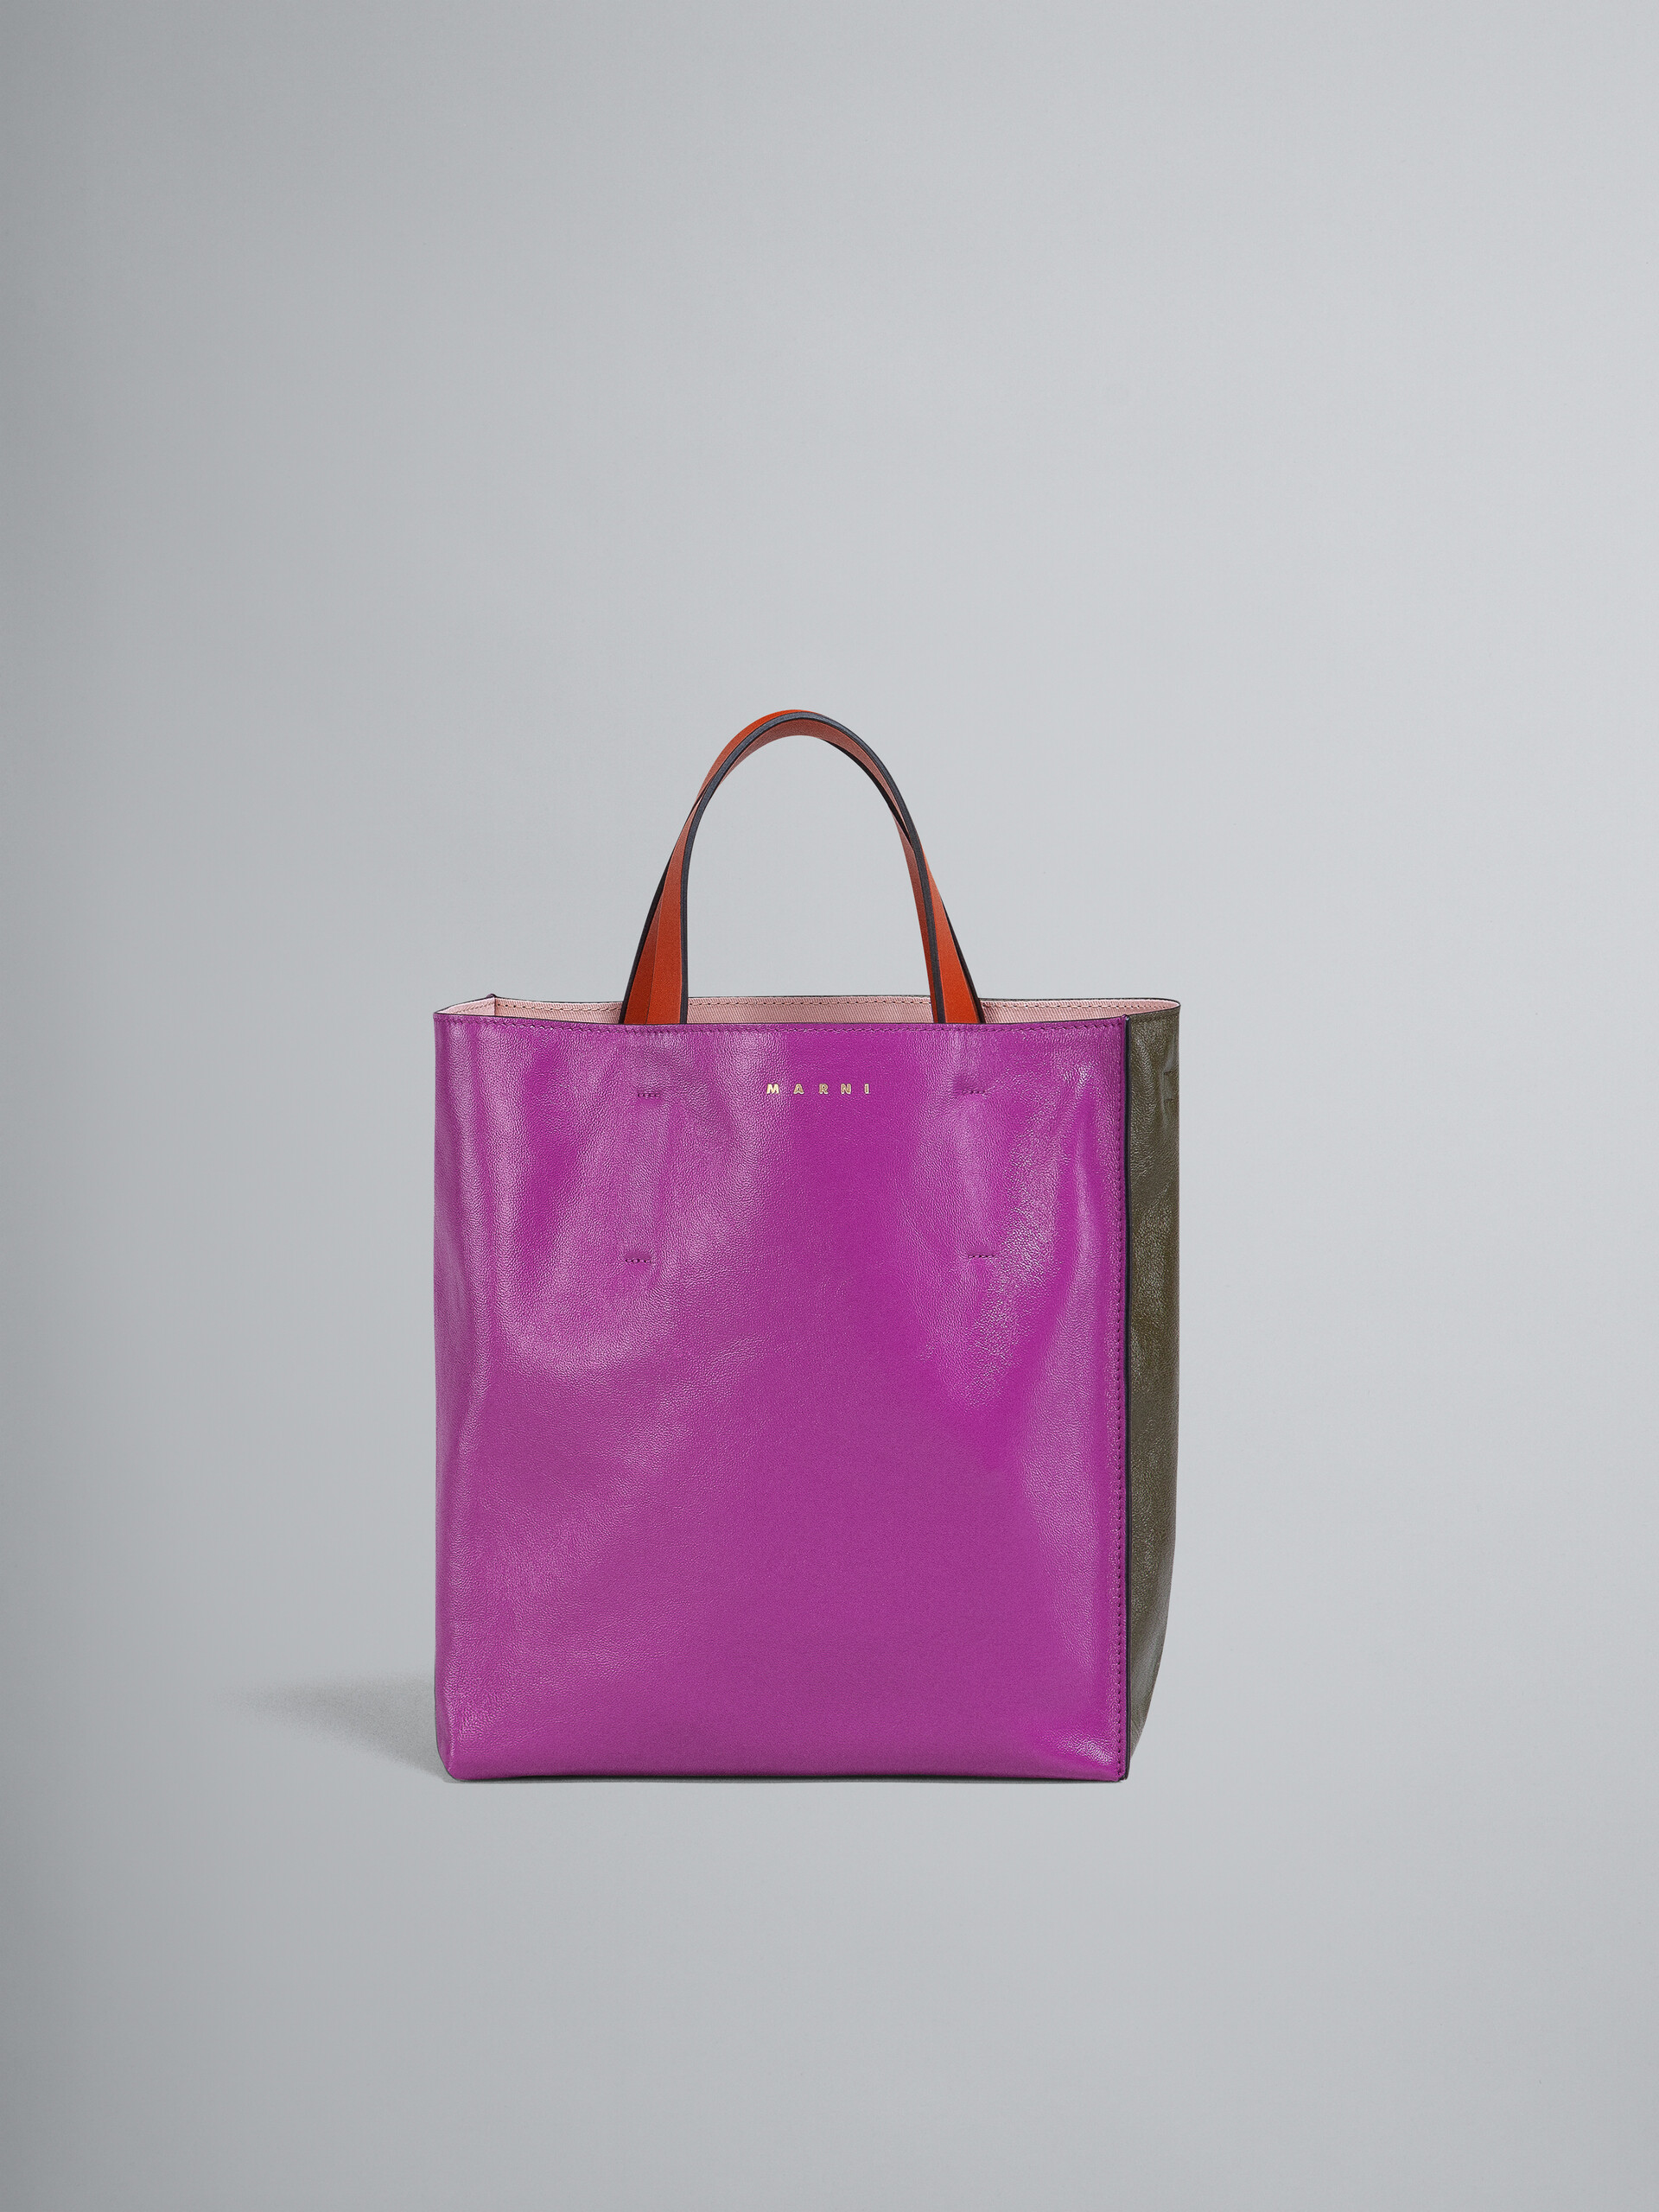 MUSEO SOFT small bag in fuchsia and green leather - Shopping Bags - Image 1